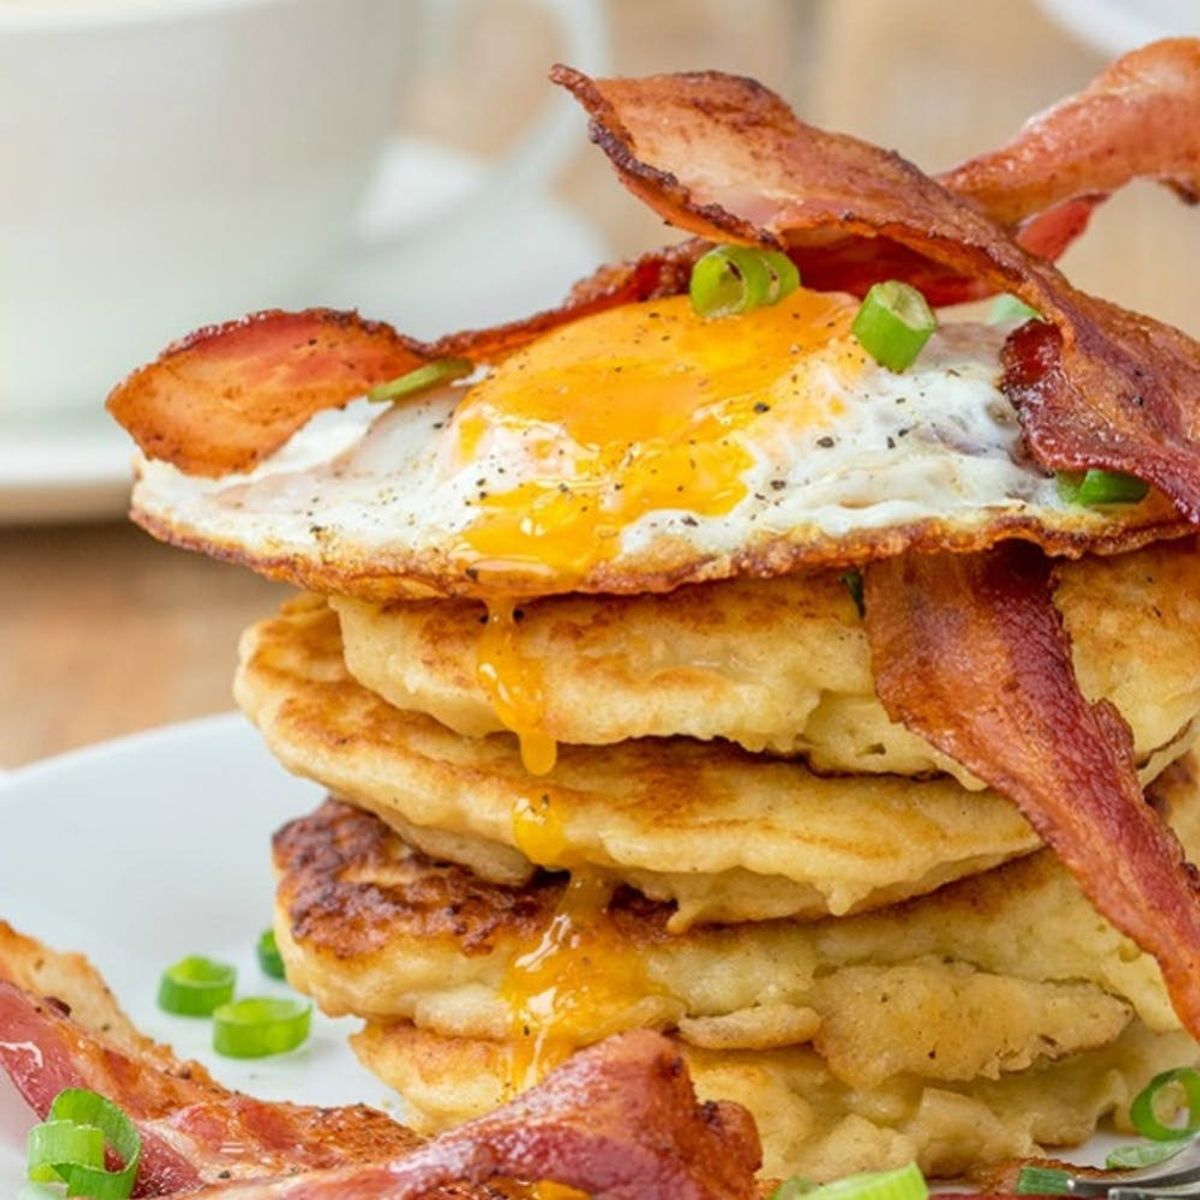 17 Sizzling Hot Bacon Recipes to Suit All Your Cravings